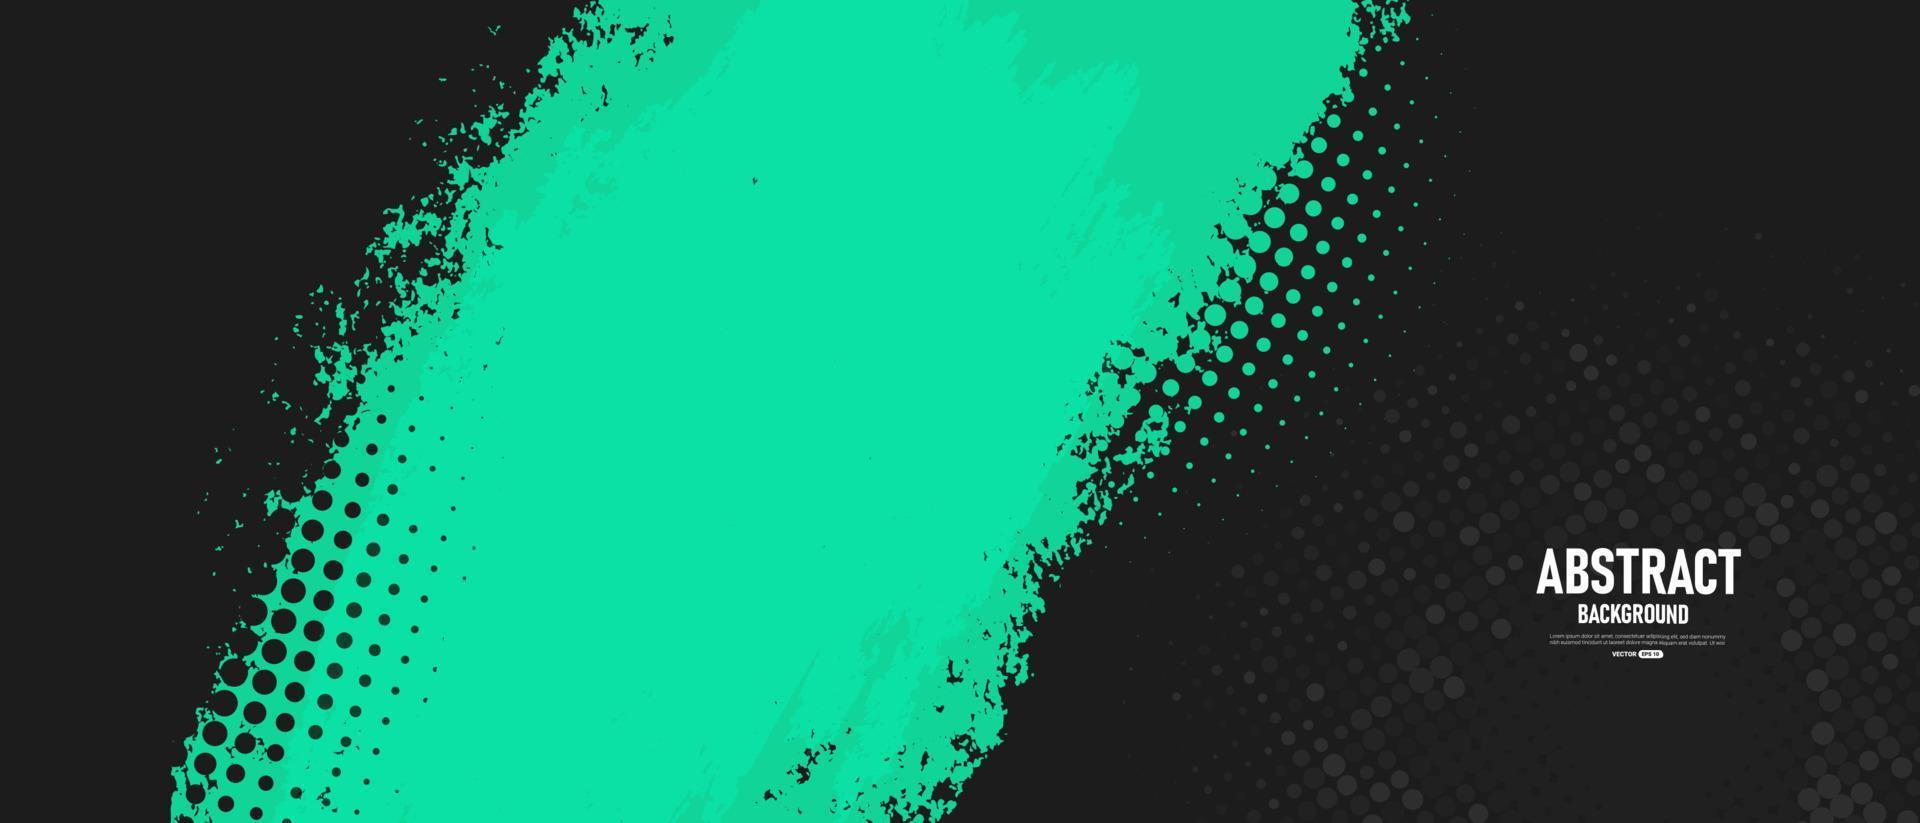 Black and green abstract grunge texture background vector